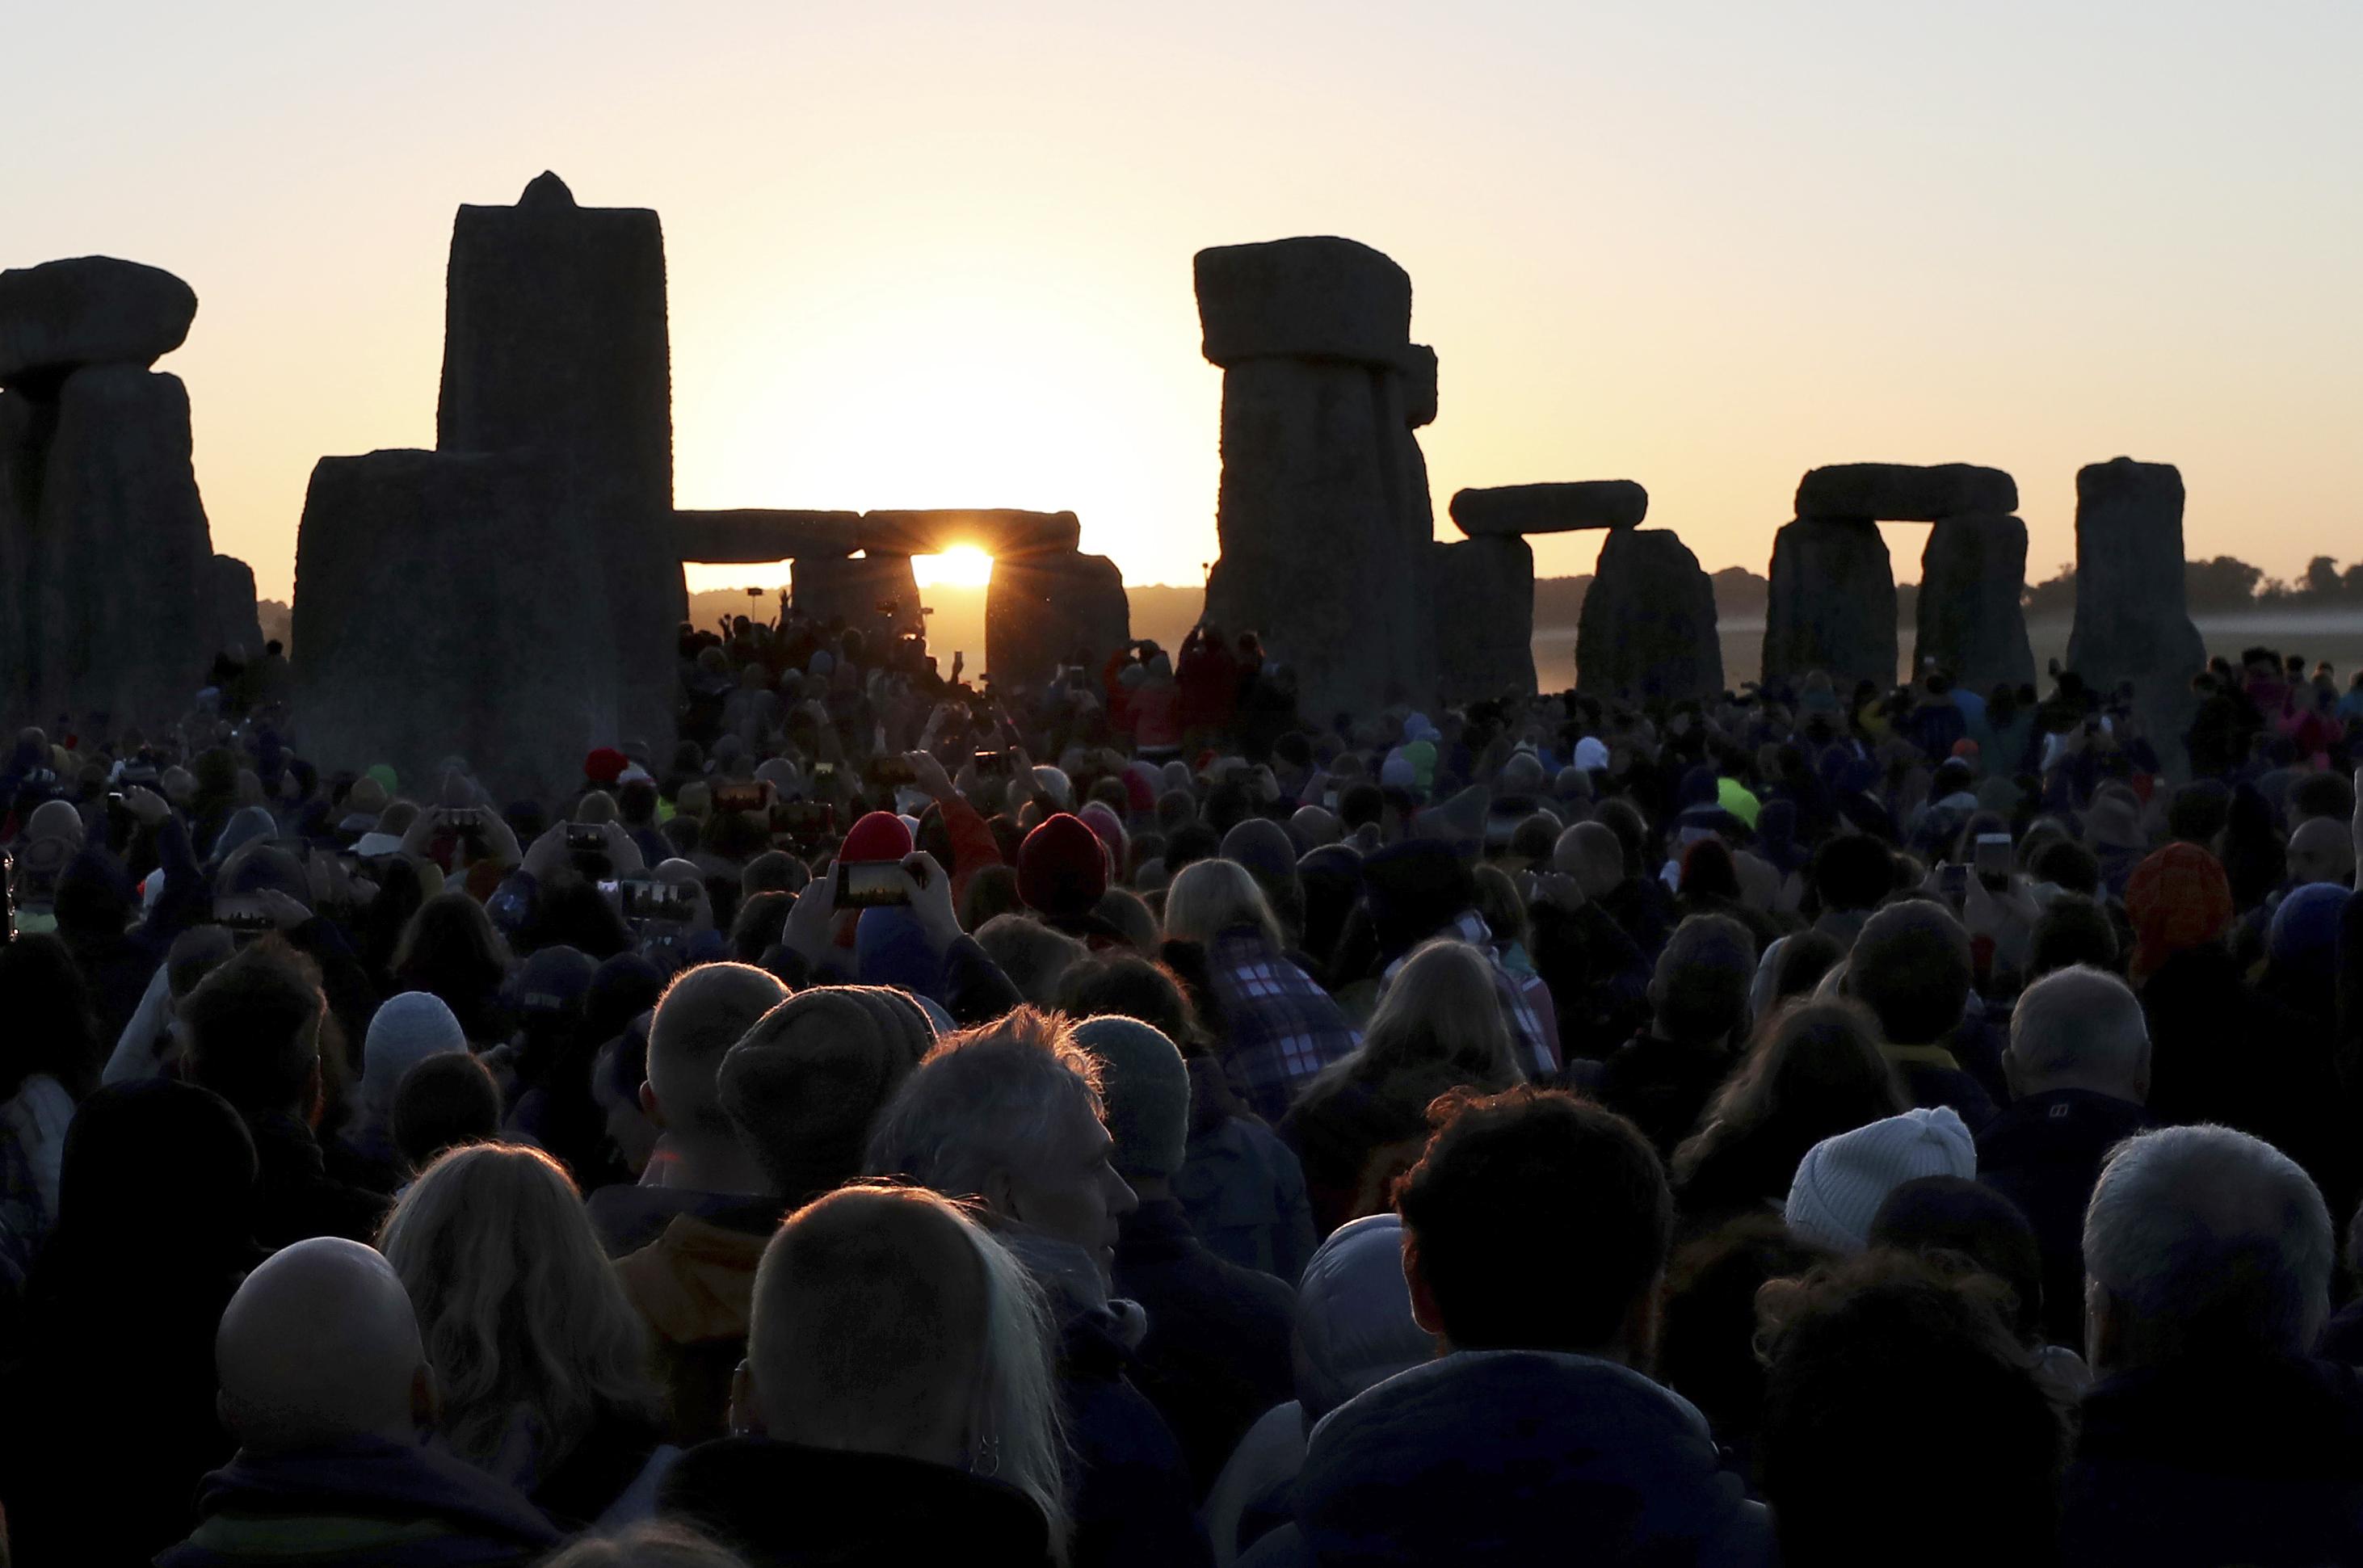 Summer solstice 10,000 watch sunrise at Stonehenge The SpokesmanReview